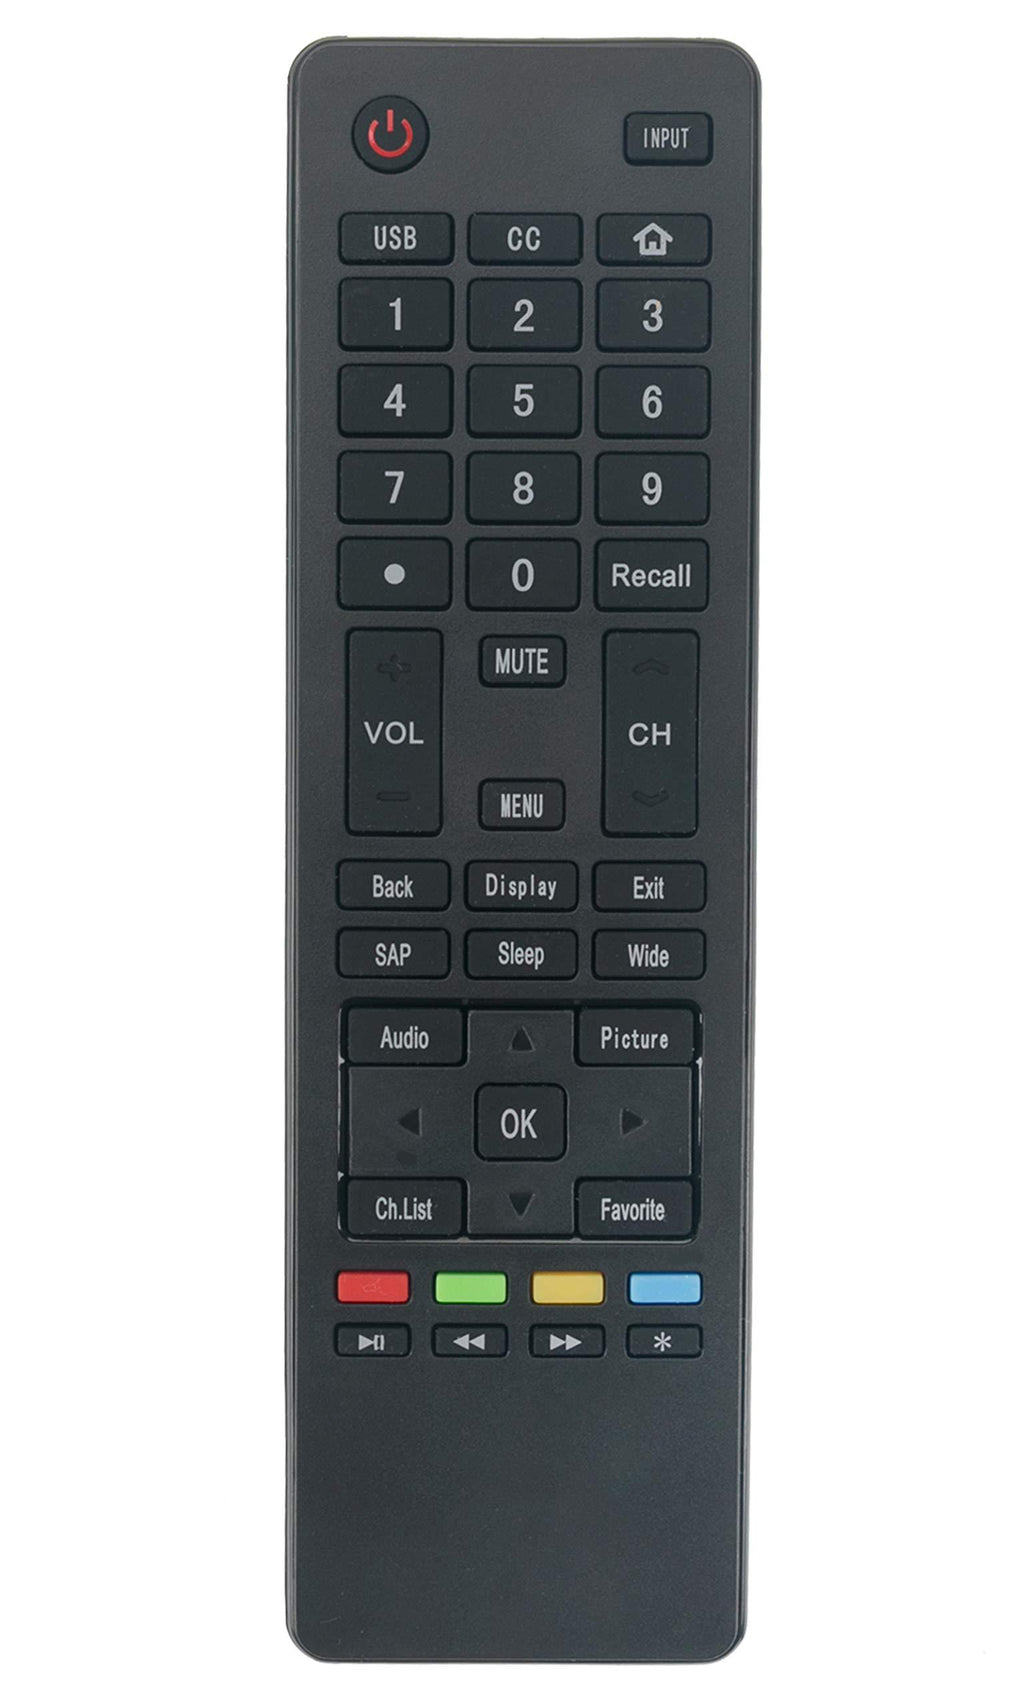 Brand New HAIER lcd led tv Remote control HTR-A18M For 32D3000 LE32M600M20 LE32F32200 LE24M600M80 LE24F33800 LE39F32800 LE39M600M80 40D3500M 48D3500 LE48M600M80 LE50M600M80 55D3550 LE55M600M80 haier TV--sold by Parts-outlet store